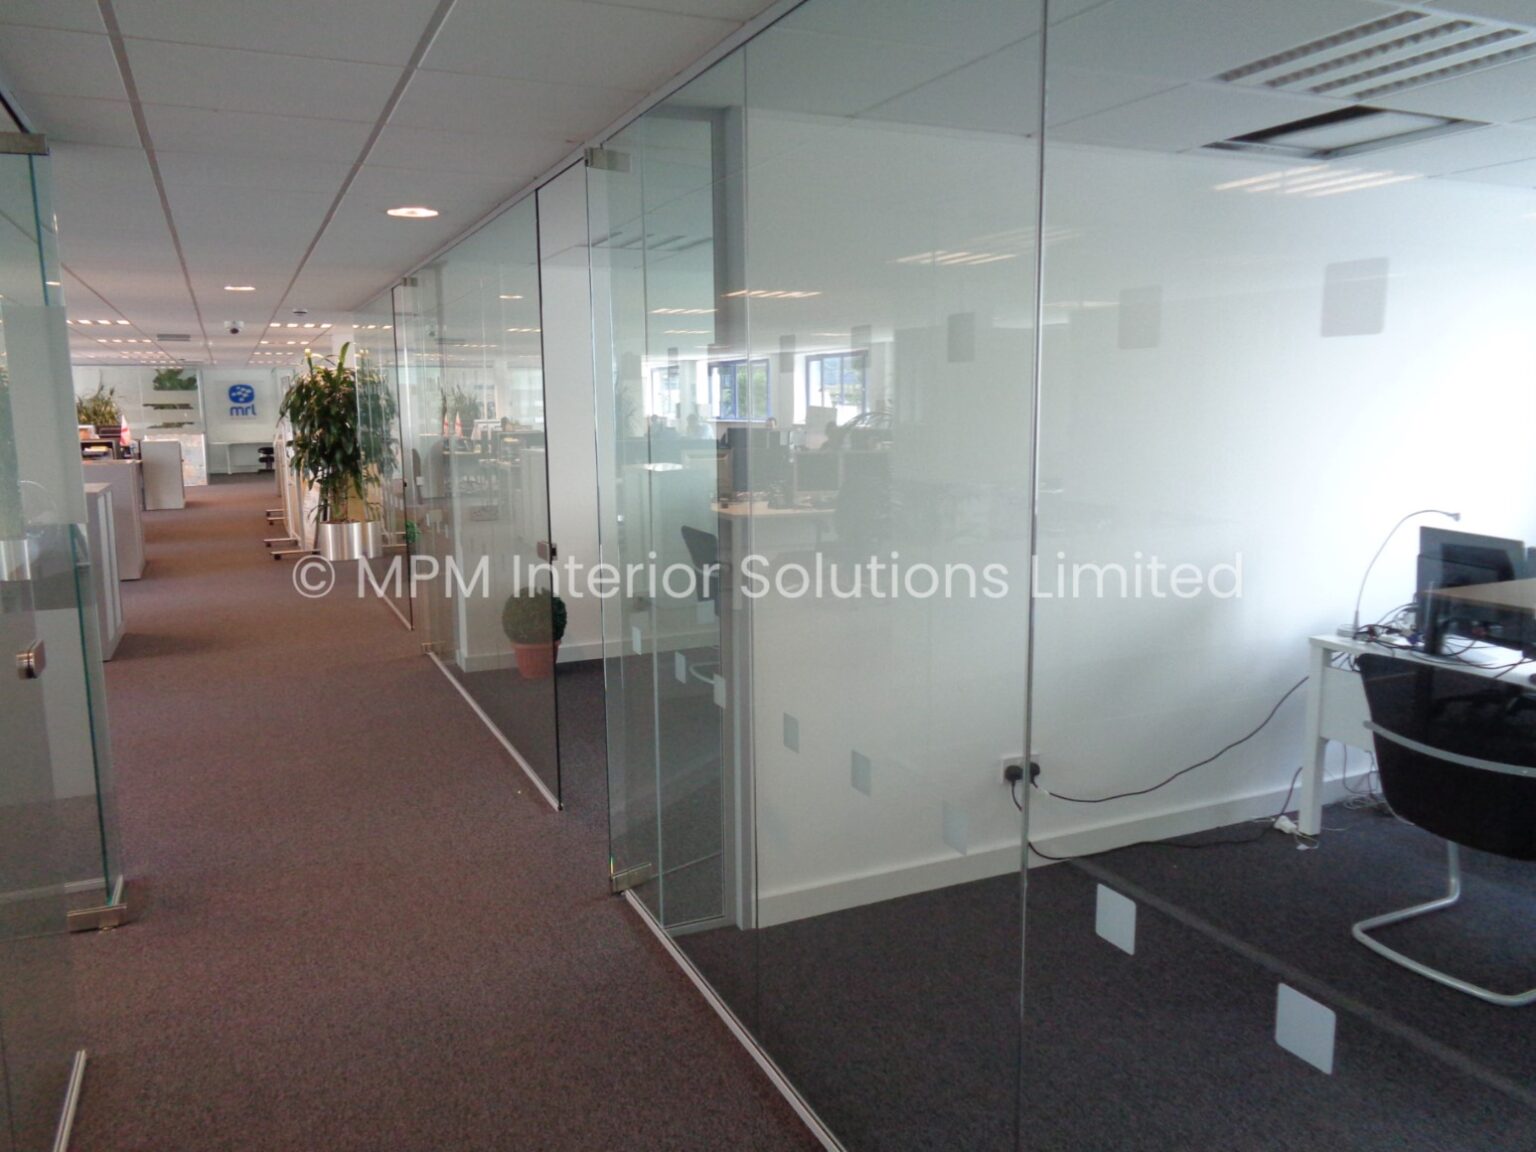 Frameless Glass Office Partitioning, 75mm > 100mm Demountable Office Partitioning, Office Refurbishment/Fit-Out, MRL Consulting Group Ltd (Hove, East Sussex), MPM Interior Solutions Limited